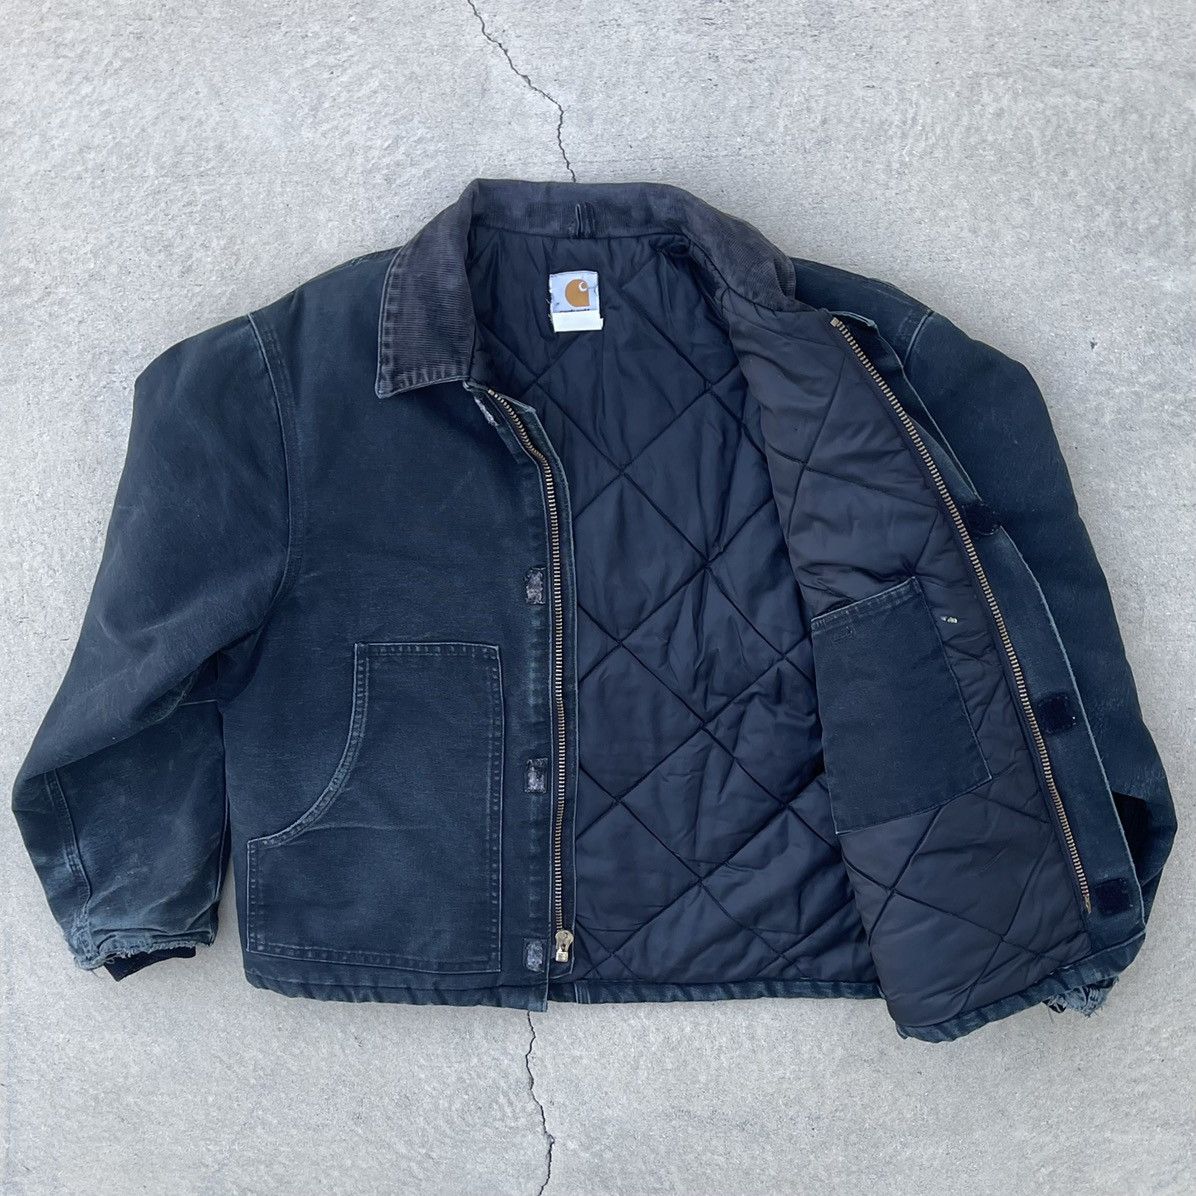 Vintage 90’s Faded & Distressed Quilted Canvas Jacket w/ Corduroy L Size US L / EU 52-54 / 3 - 2 Preview